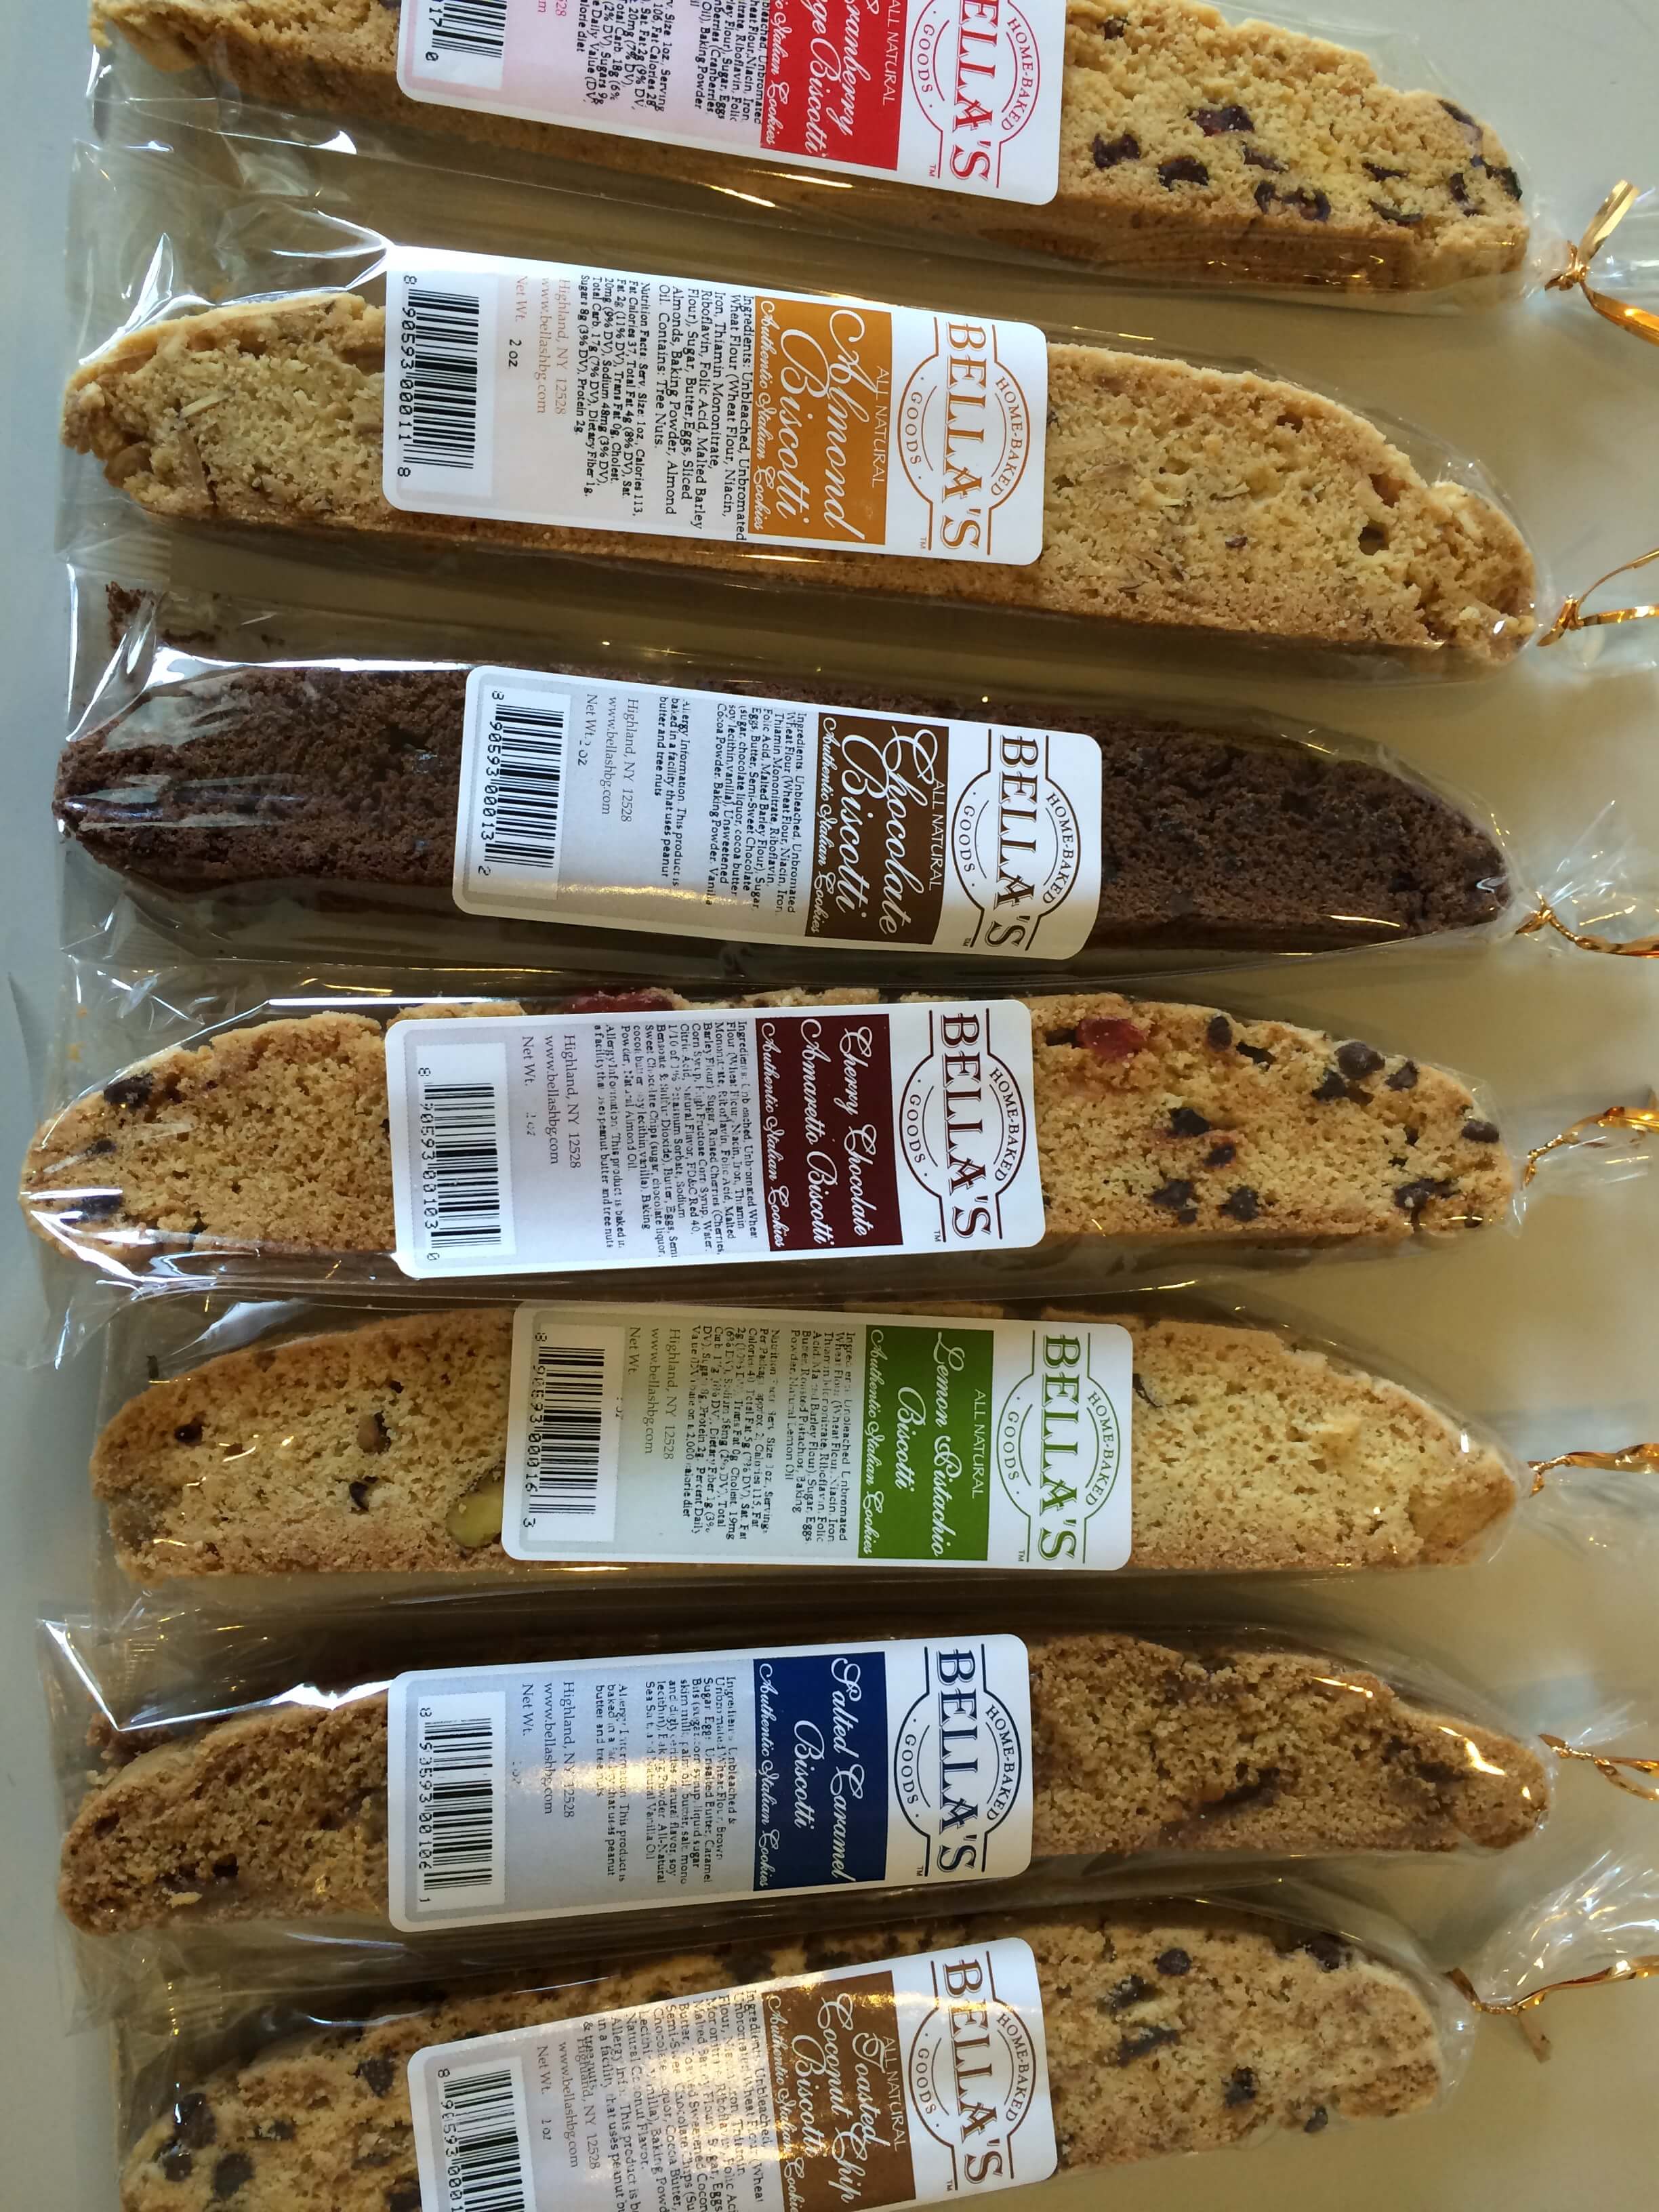 Bella's Home-Baked Goods: Italian Biscotti, caramel, upstate NY specialty dessert foods